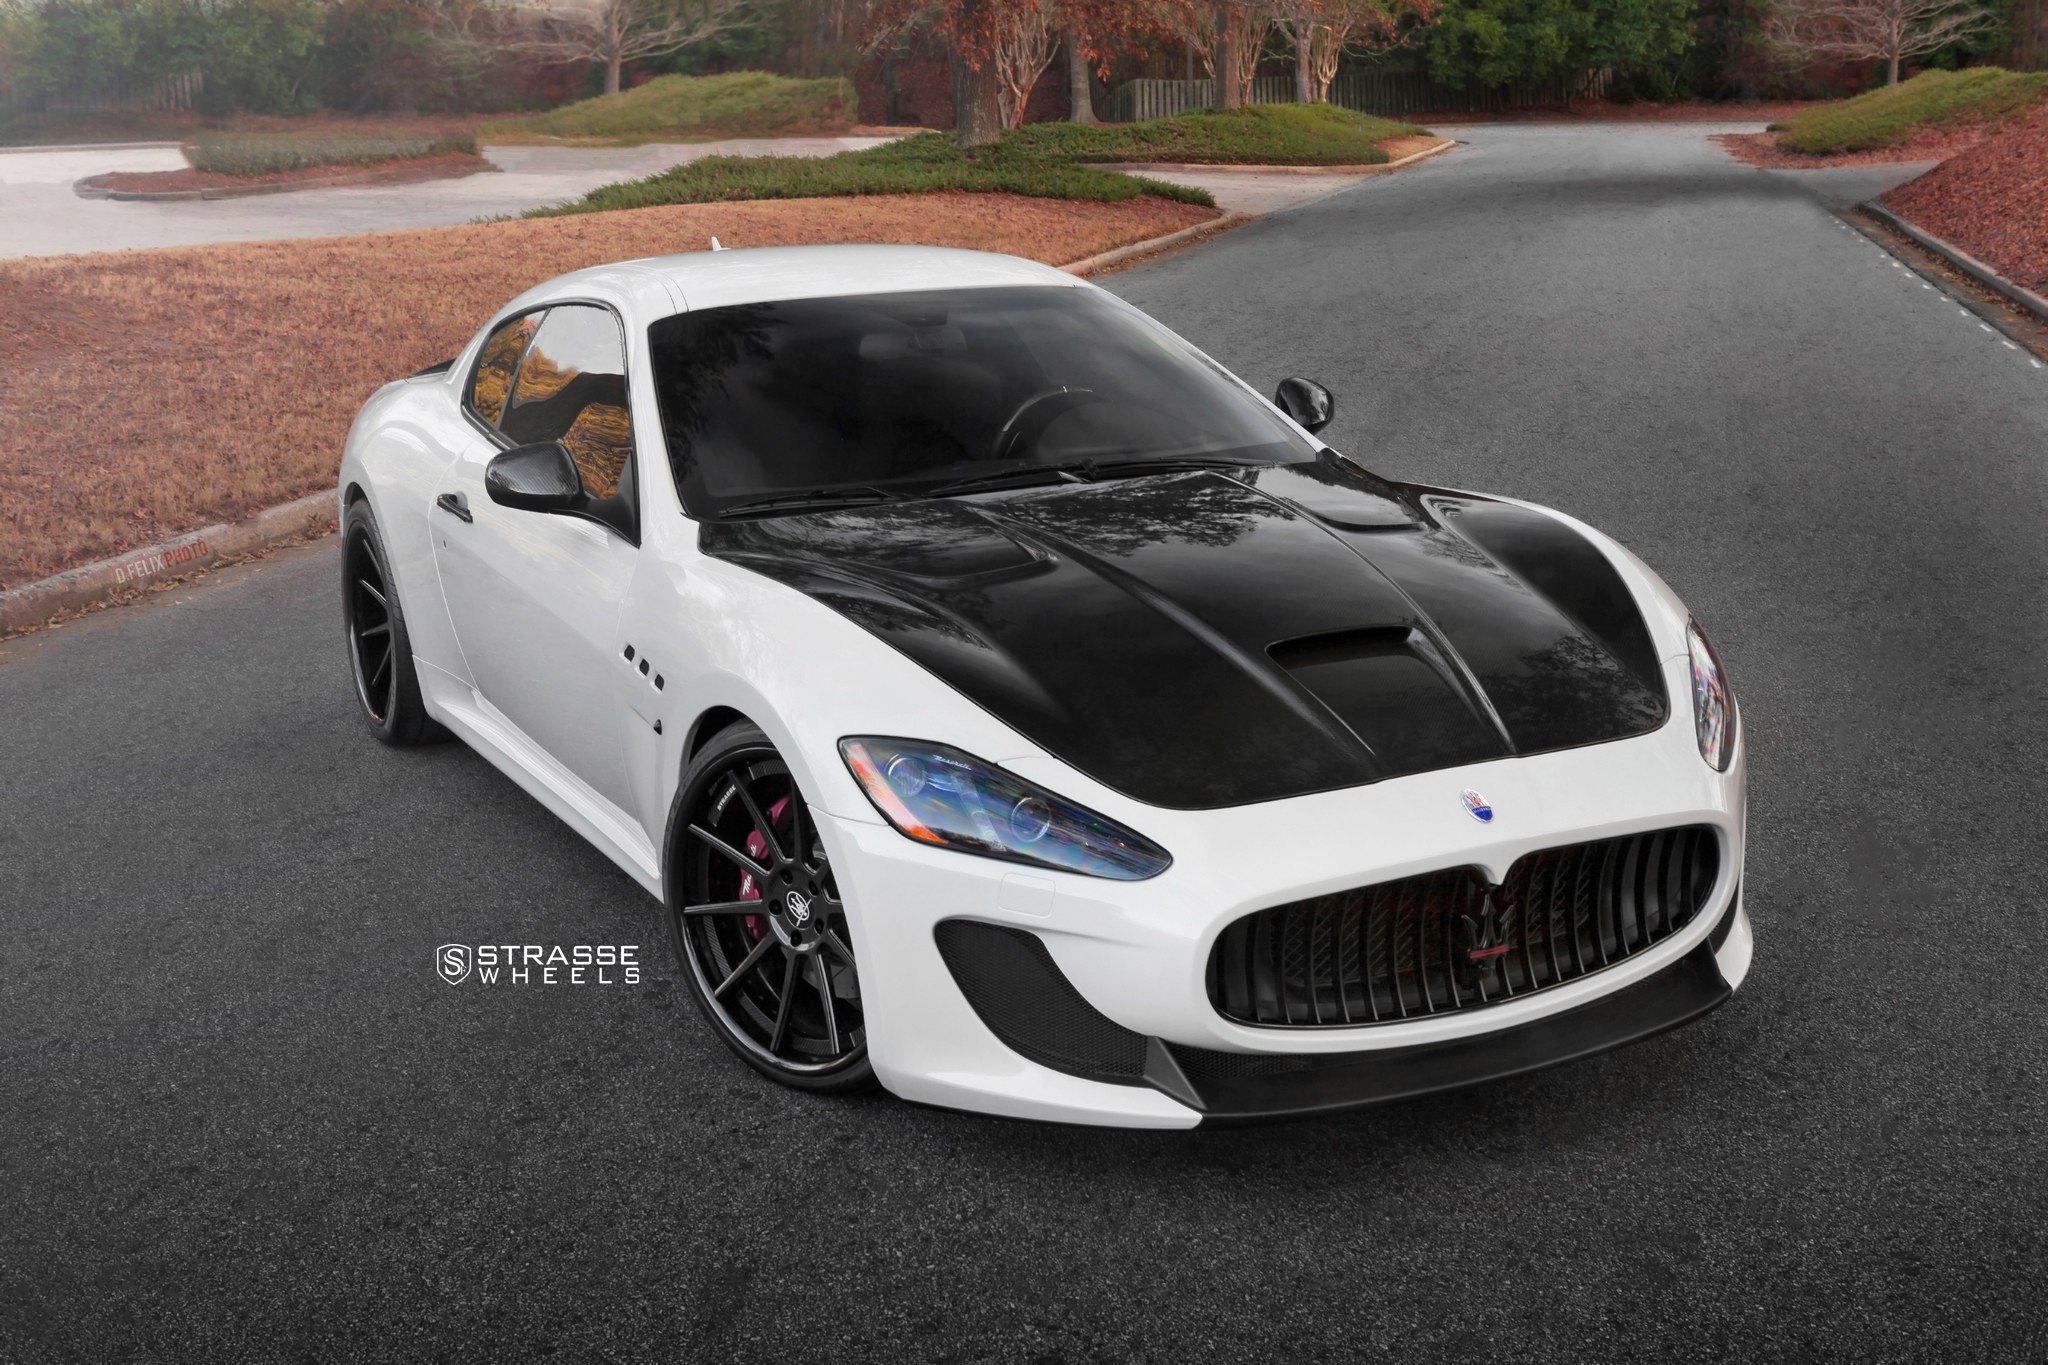 White Maserati Granturismo with Custom Vented Hood - Photo by Strasse Forged